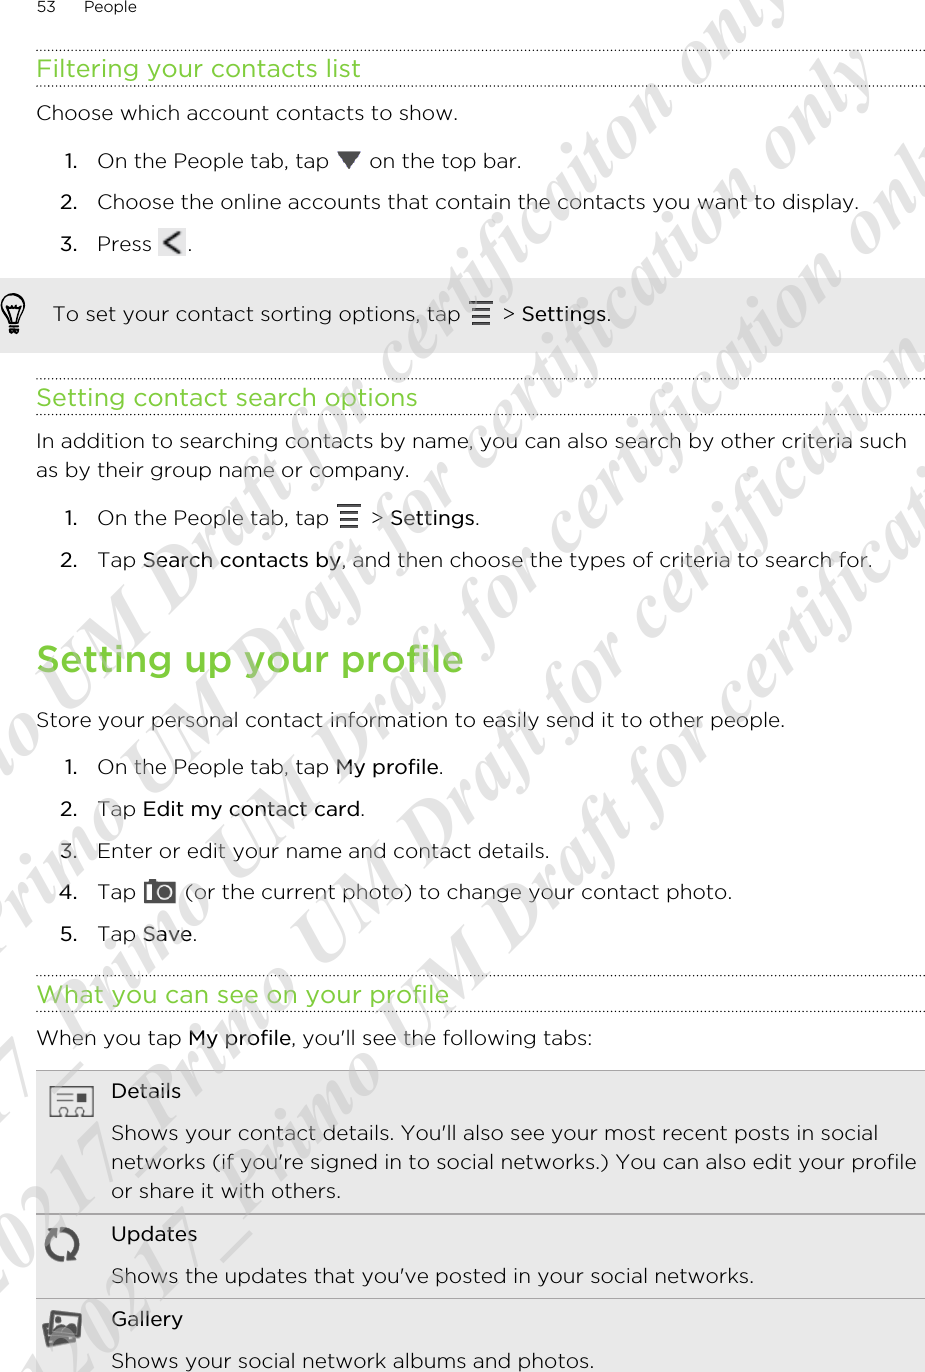 Filtering your contacts listChoose which account contacts to show.1. On the People tab, tap   on the top bar.2. Choose the online accounts that contain the contacts you want to display.3. Press  .To set your contact sorting options, tap   &gt; Settings.Setting contact search optionsIn addition to searching contacts by name, you can also search by other criteria suchas by their group name or company.1. On the People tab, tap   &gt; Settings.2. Tap Search contacts by, and then choose the types of criteria to search for.Setting up your profileStore your personal contact information to easily send it to other people.1. On the People tab, tap My profile.2. Tap Edit my contact card.3. Enter or edit your name and contact details.4. Tap   (or the current photo) to change your contact photo.5. Tap Save.What you can see on your profileWhen you tap My profile, you&apos;ll see the following tabs:DetailsShows your contact details. You&apos;ll also see your most recent posts in socialnetworks (if you&apos;re signed in to social networks.) You can also edit your profileor share it with others.UpdatesShows the updates that you&apos;ve posted in your social networks.GalleryShows your social network albums and photos.53 People20120217_Primo UM Draft for certificaiton only 20120217_Primo UM Draft for certification only 20120217_Primo UM Draft for certification only 20120217_Primo UM Draft for certification only 20120217_Primo UM Draft for certification only  